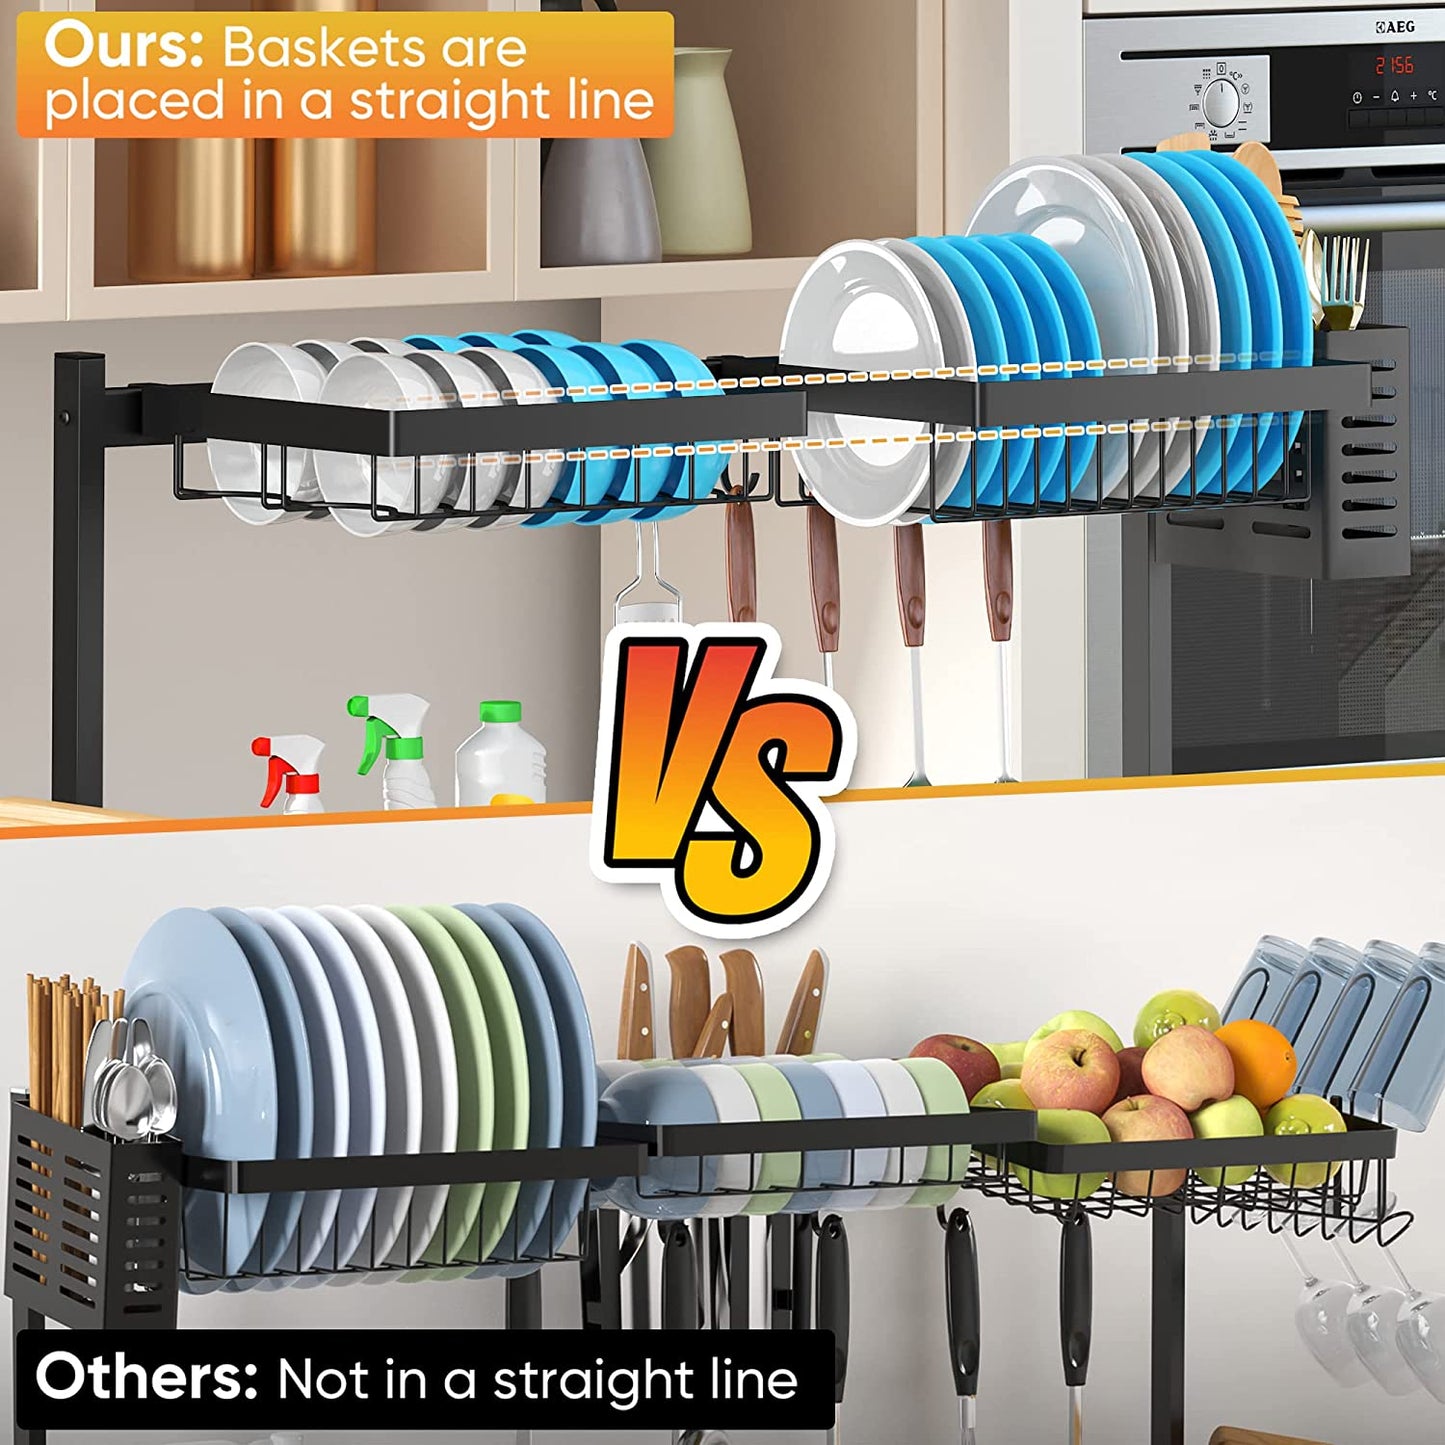 over Sink Dish Drying Rack (26"-38"), Adjustable Large Dish Drainer for Storage Kitchen Counter Organization, 2 Tier Stainless Steel over Sink Dish Rack Display-Simplified